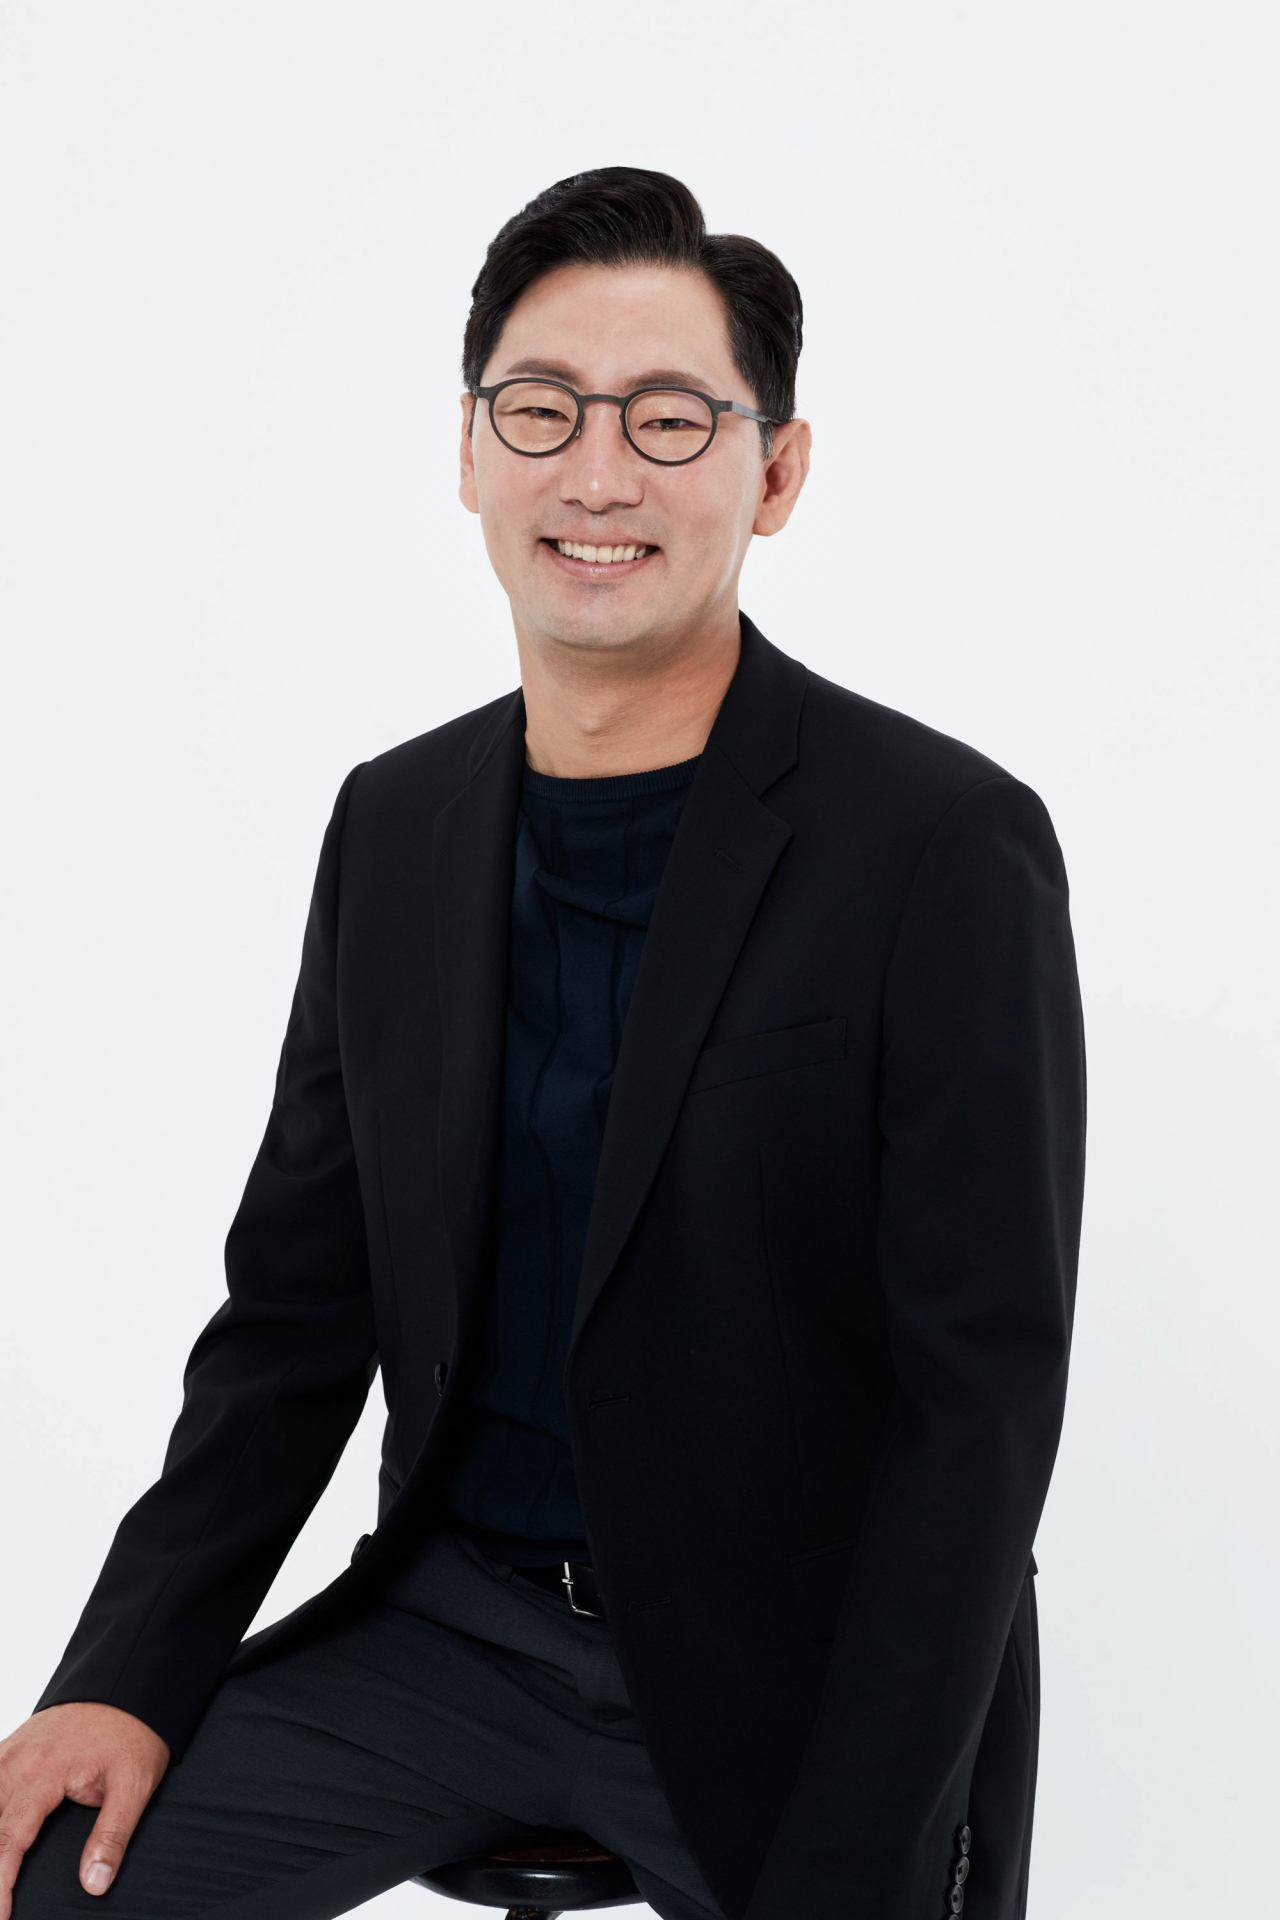 Kakao Pay Vice President Shin Ho-cheol, also known as Simon Shin, was appointed a board member of the US brokerage firm Siebert Financial in June. (Kakao Pay)